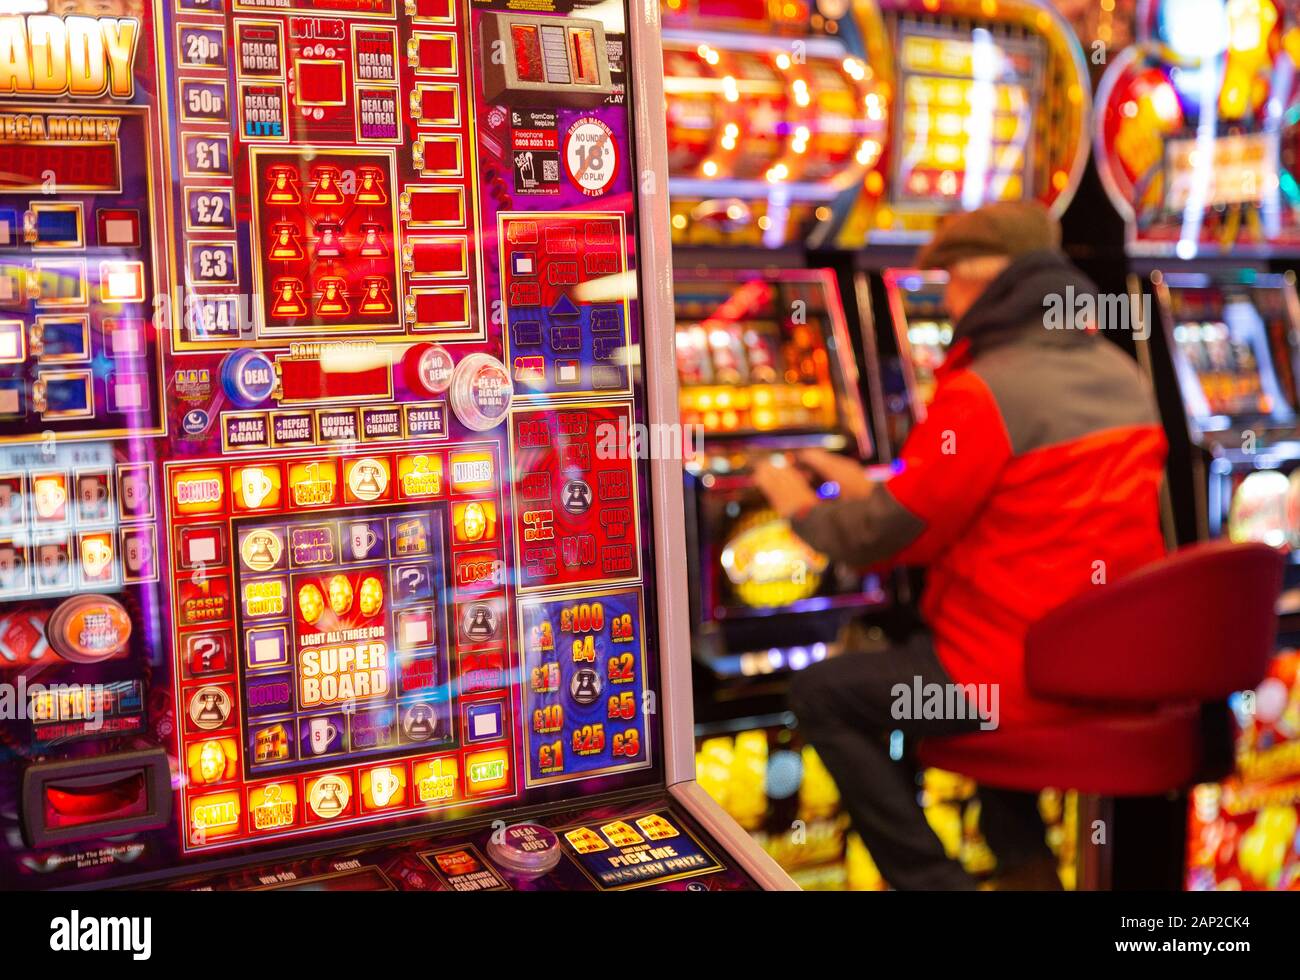 Gambling UK - a man playing slot machines in a casino, example of a gambling lifestyle; Skegness Lincolnshire England UK Stock Photo